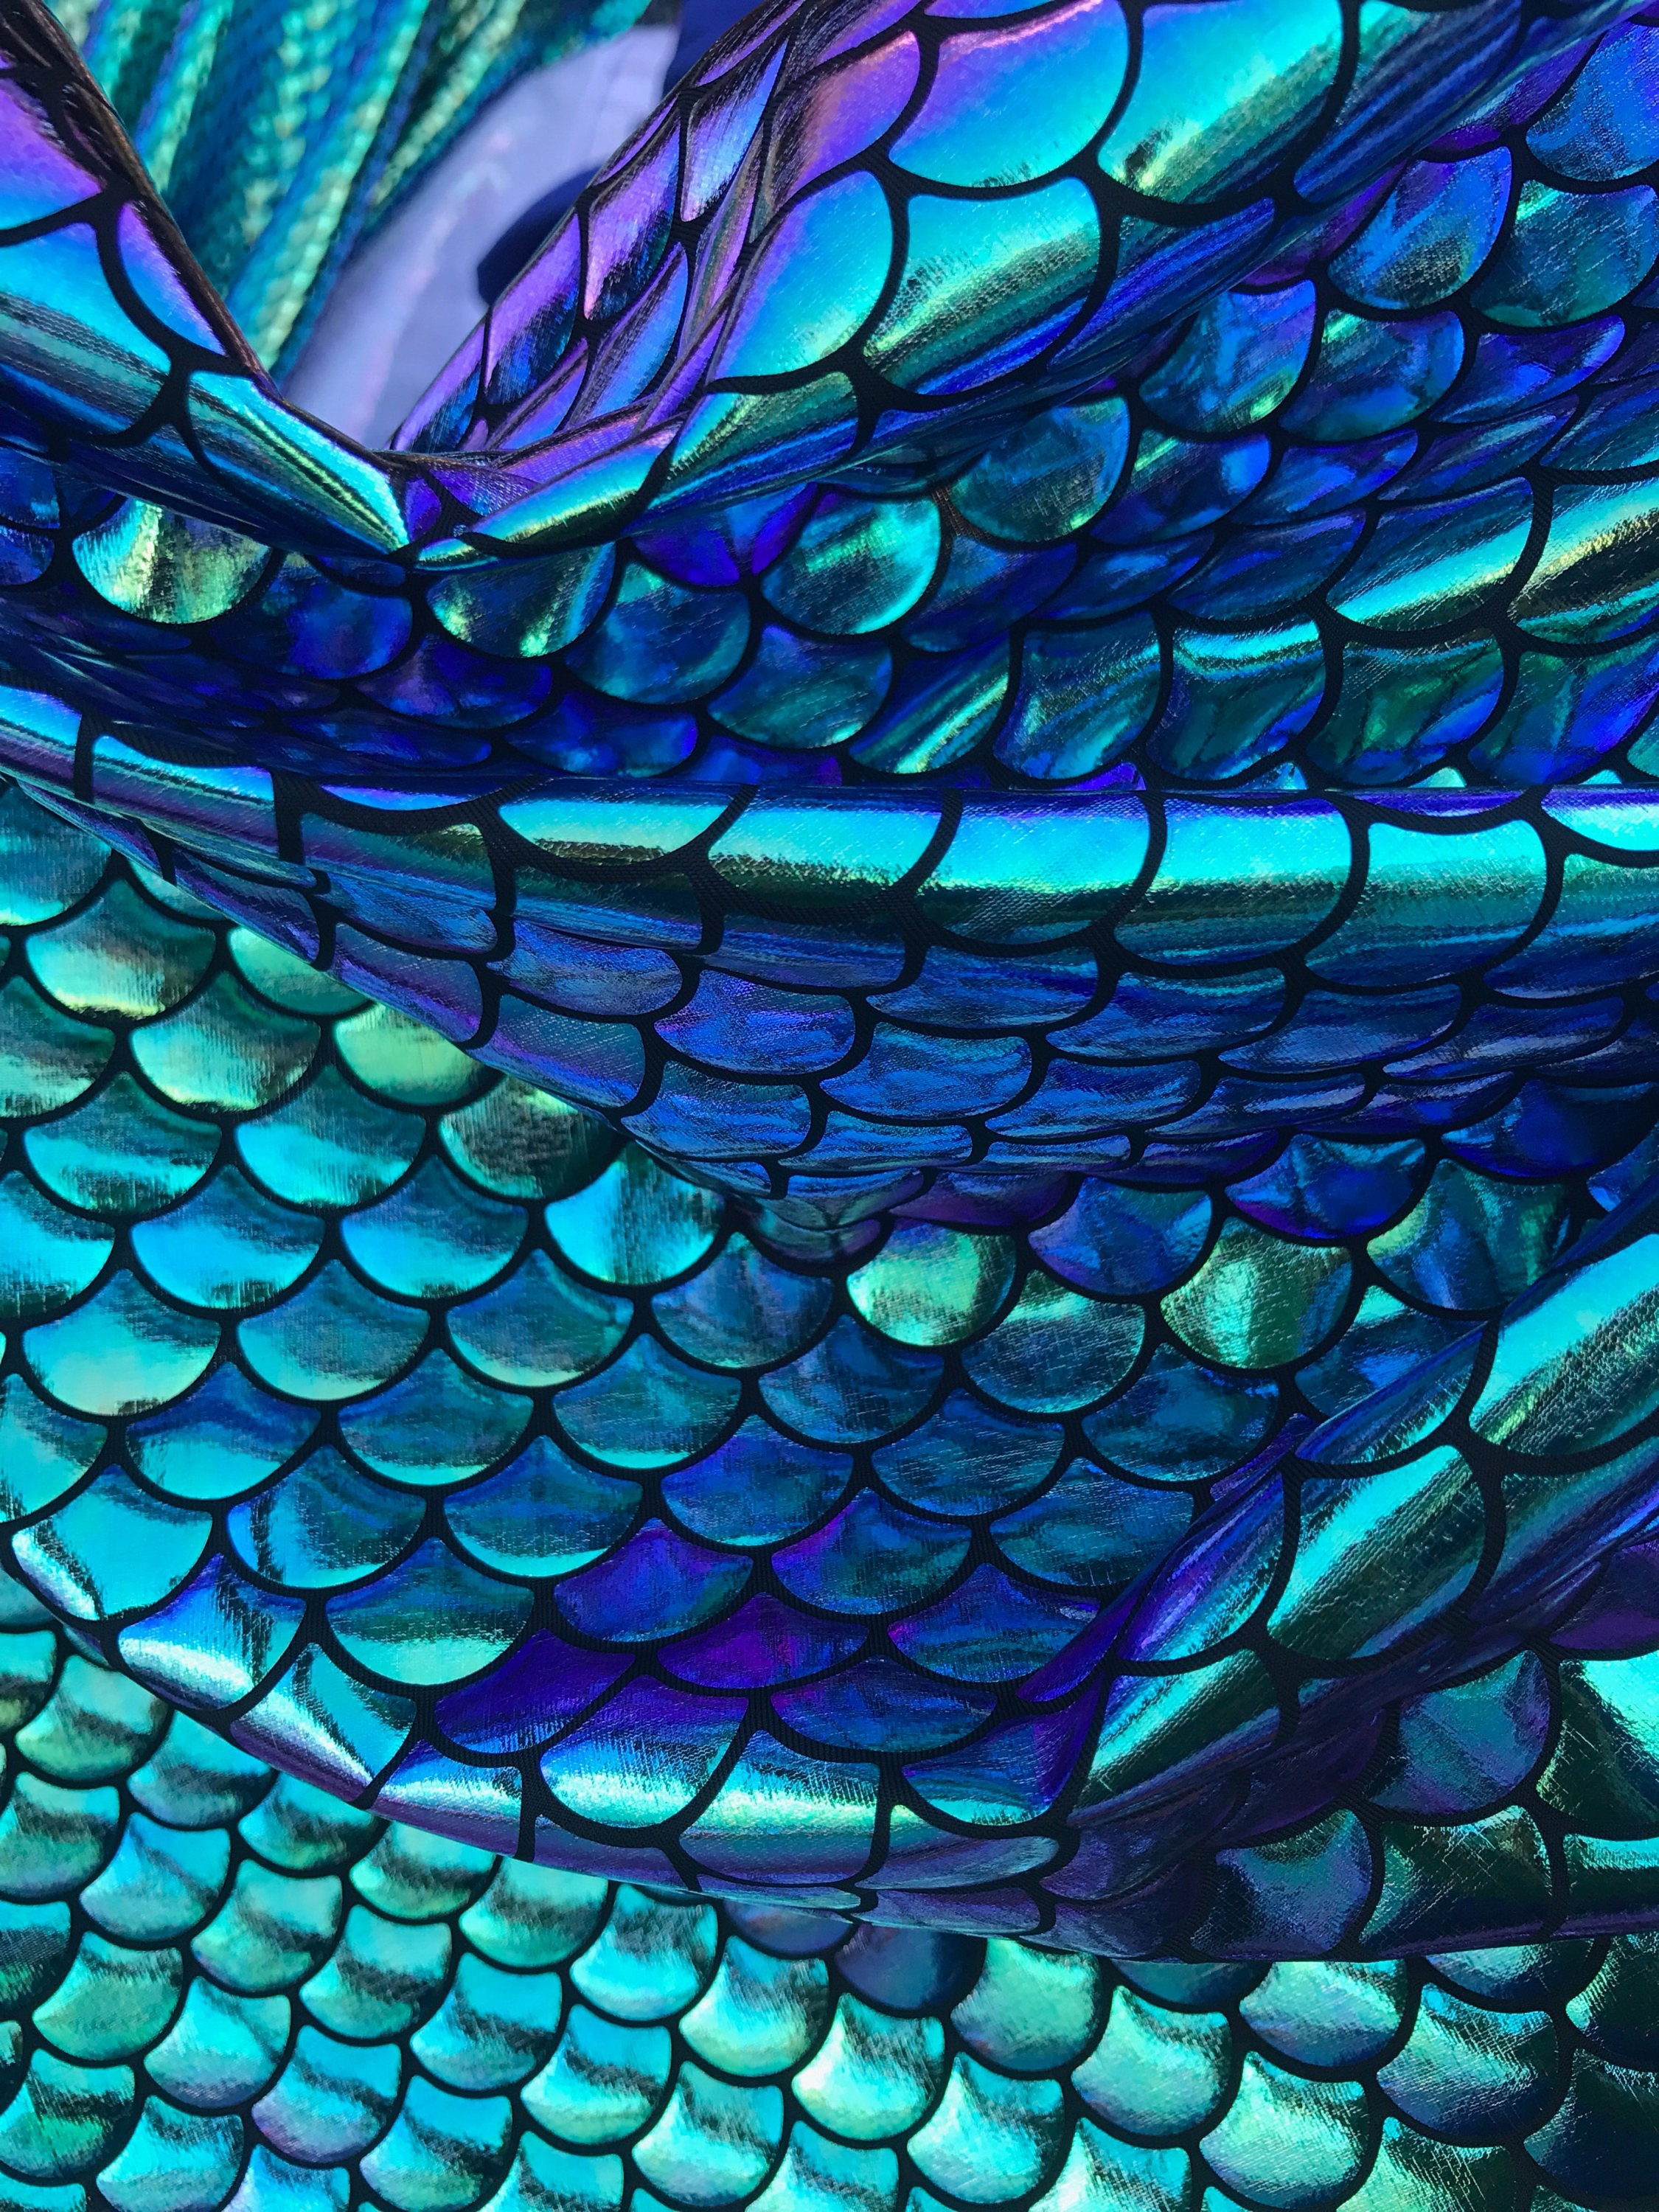 Mermaid Scale Fabric Iridescent Color Gold/green/blue/purple on Spandex  Fabric Sold by Yard Fish Scales Iridecent not Washable 